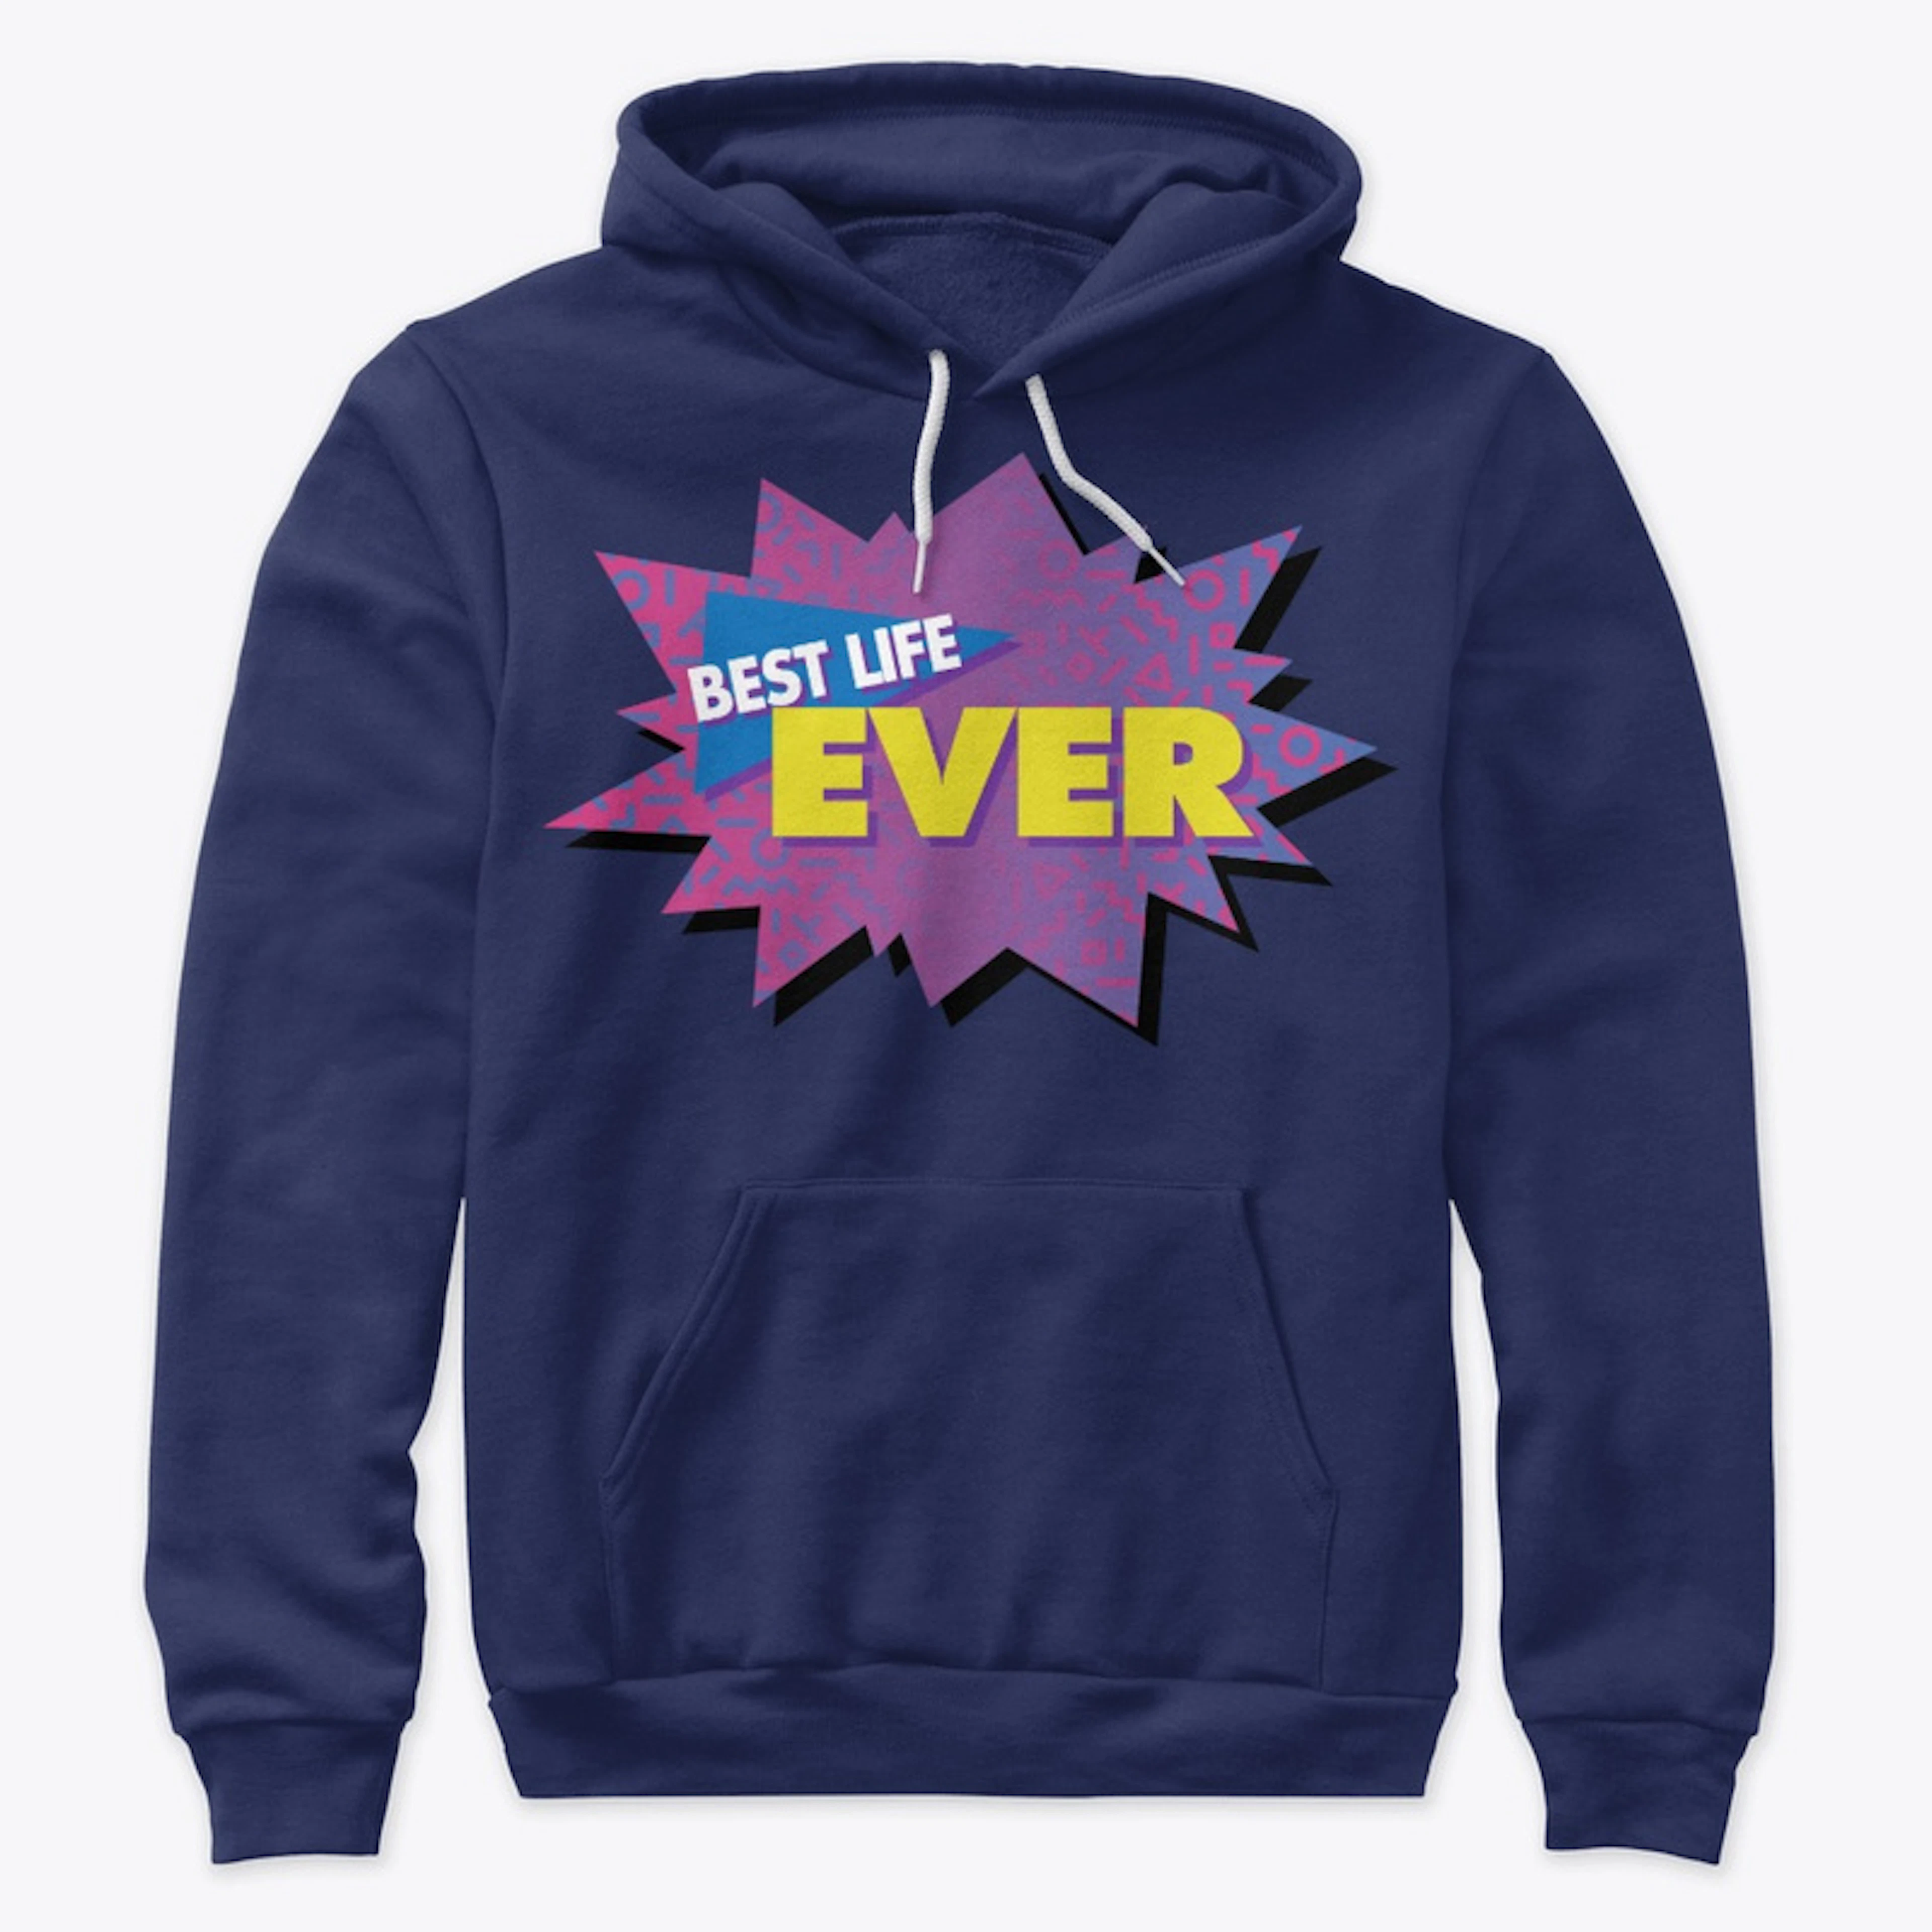 Retro 80s Themed Best Life Ever Clothes